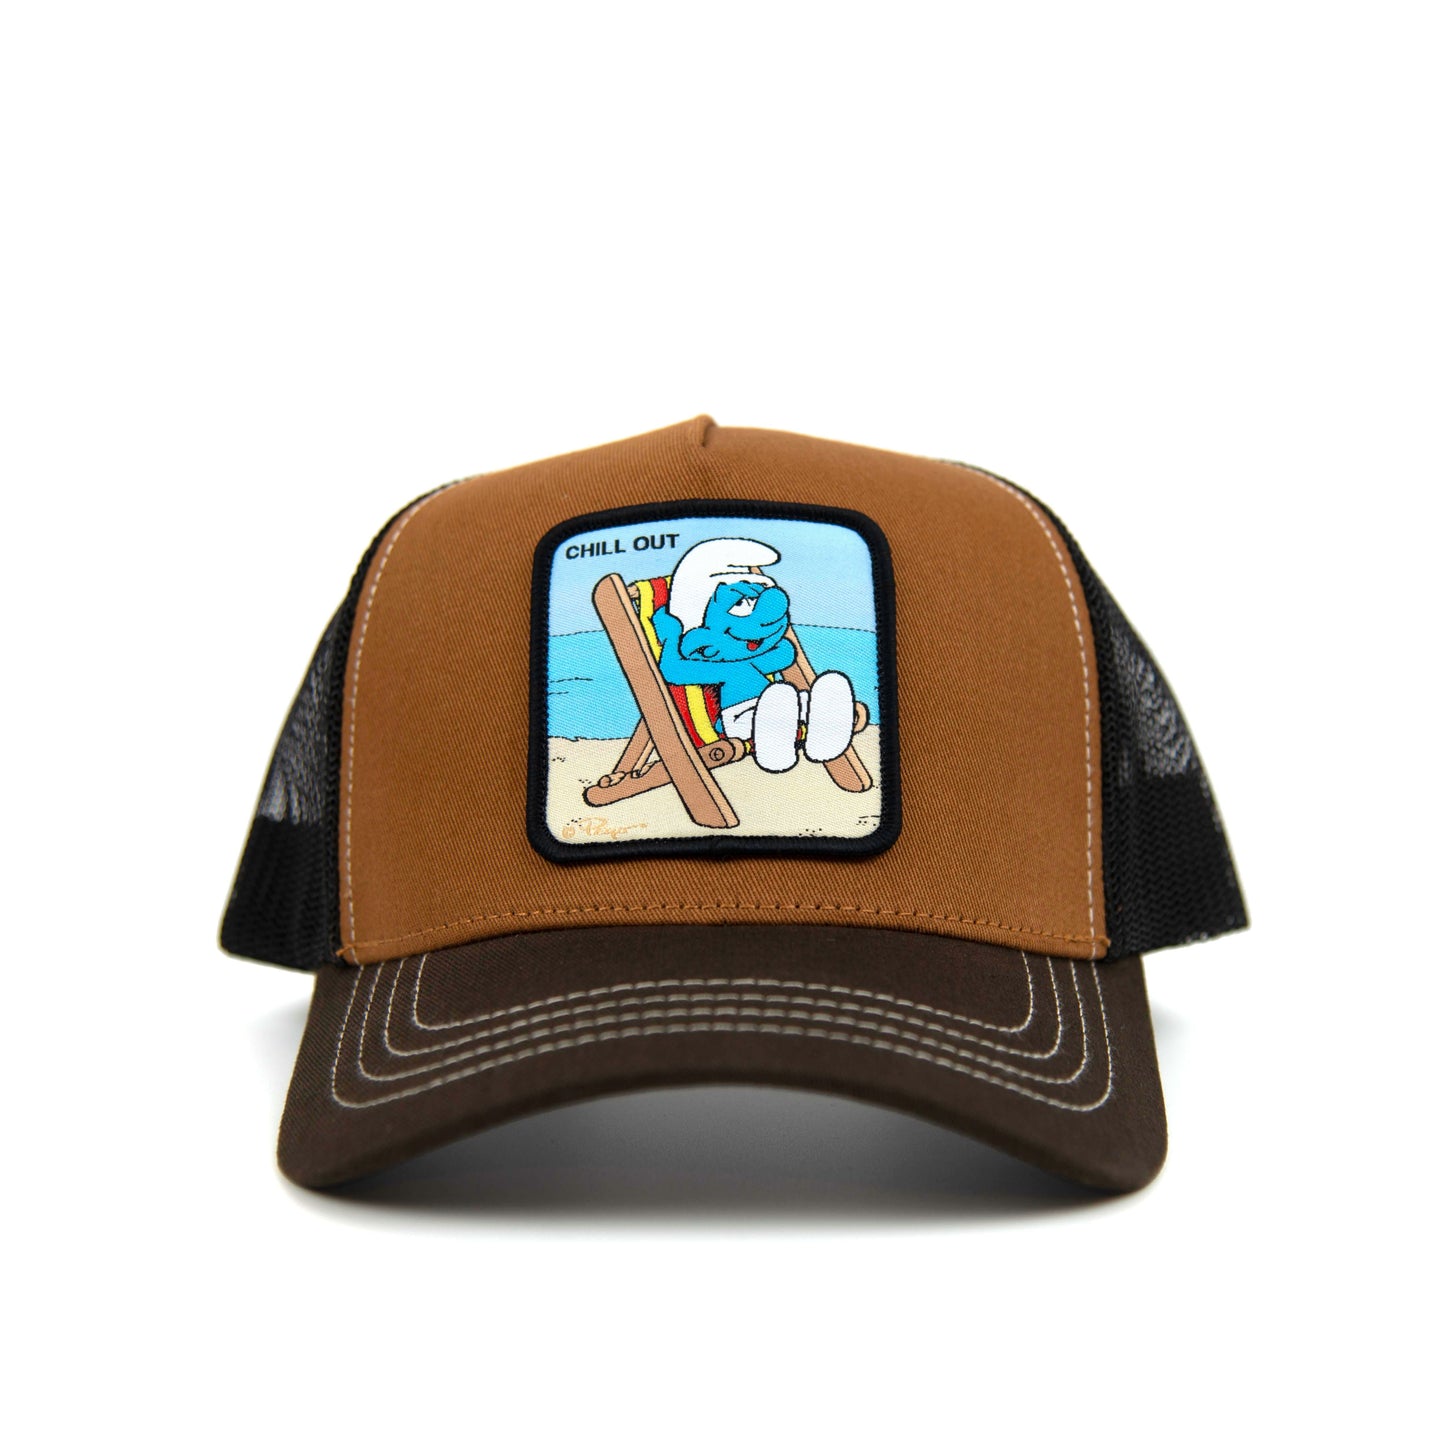 The Smurfs Chill Out Trucker Hat